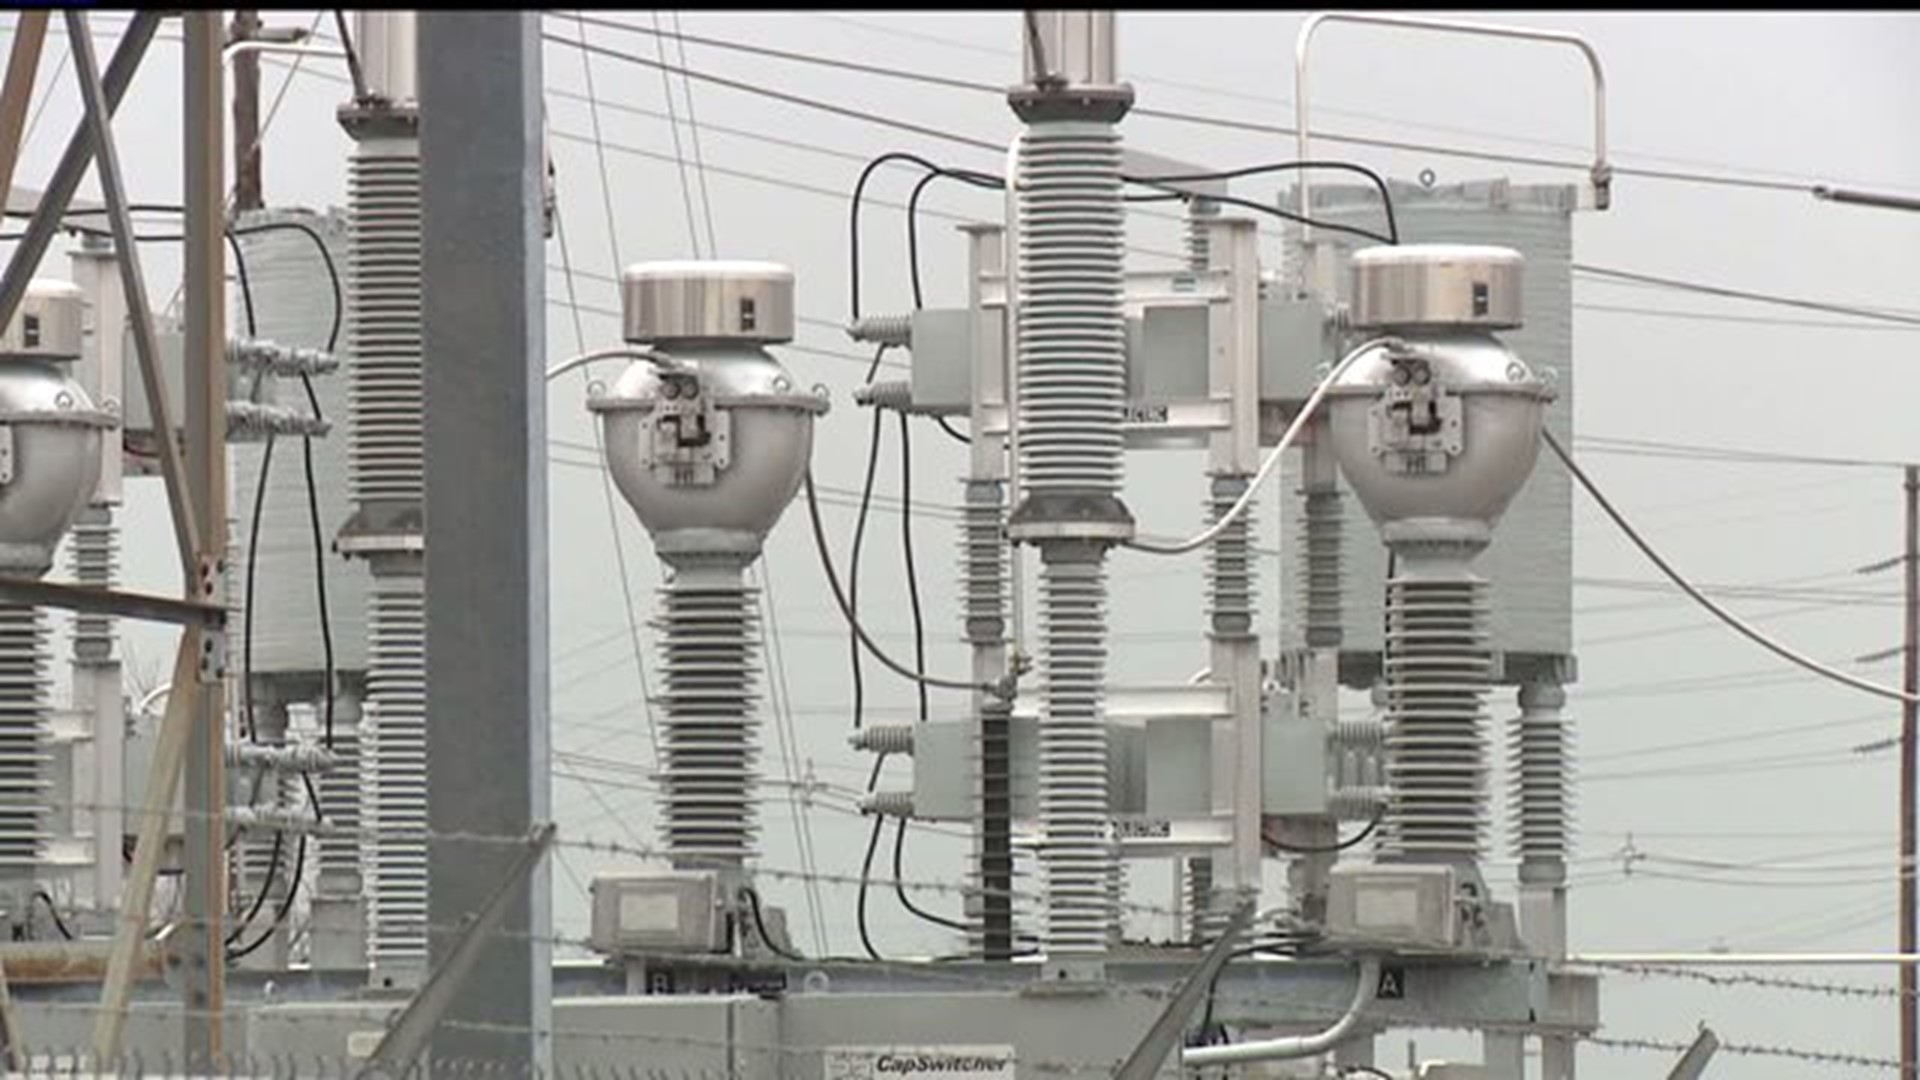 Reducing Power Outages from Storms